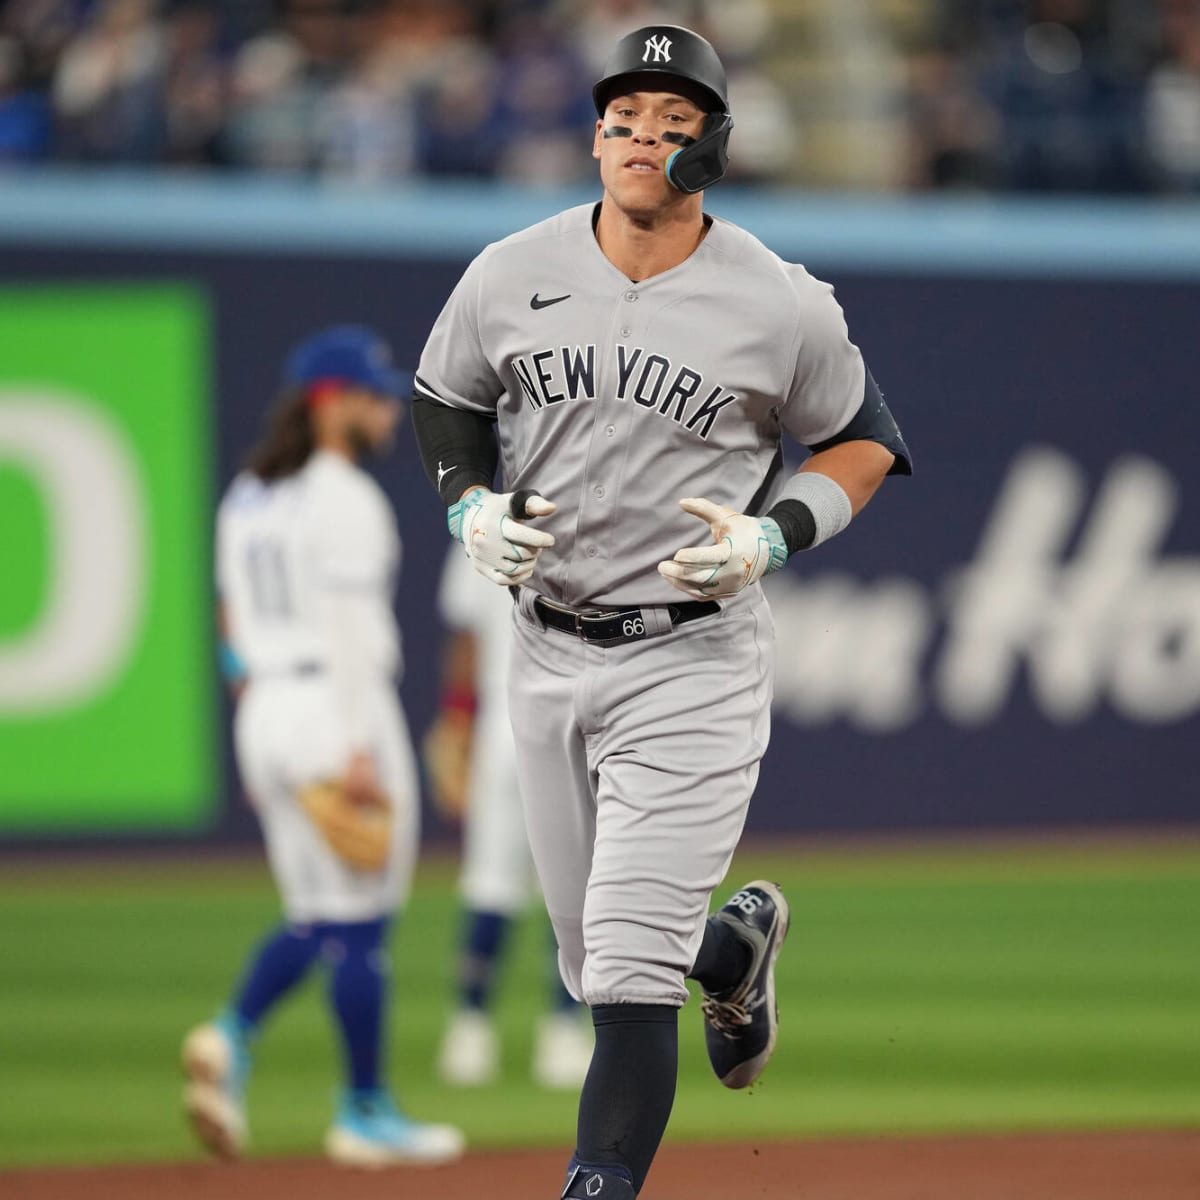 Blue Jays' Jackson says he was tipping pitches against Yankees' Aaron Judge, MLB